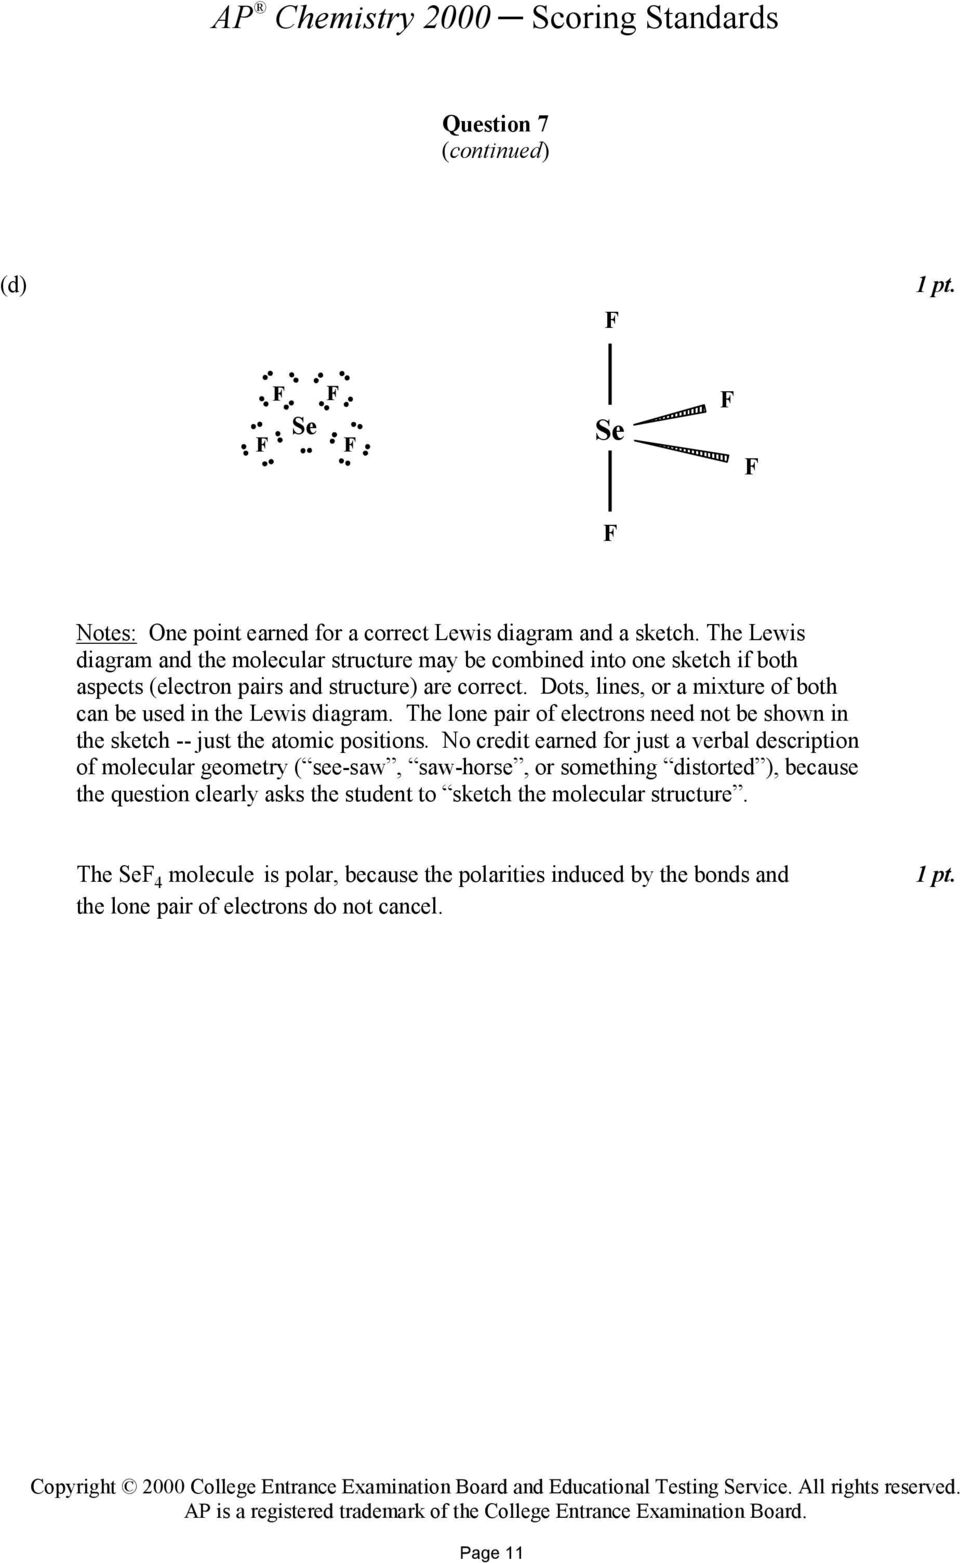 Dots, lines, or a mixture of both can be used in the Lewis diagram. The lone pair of electrons need not be shown in the sketch -- just the atomic positions.